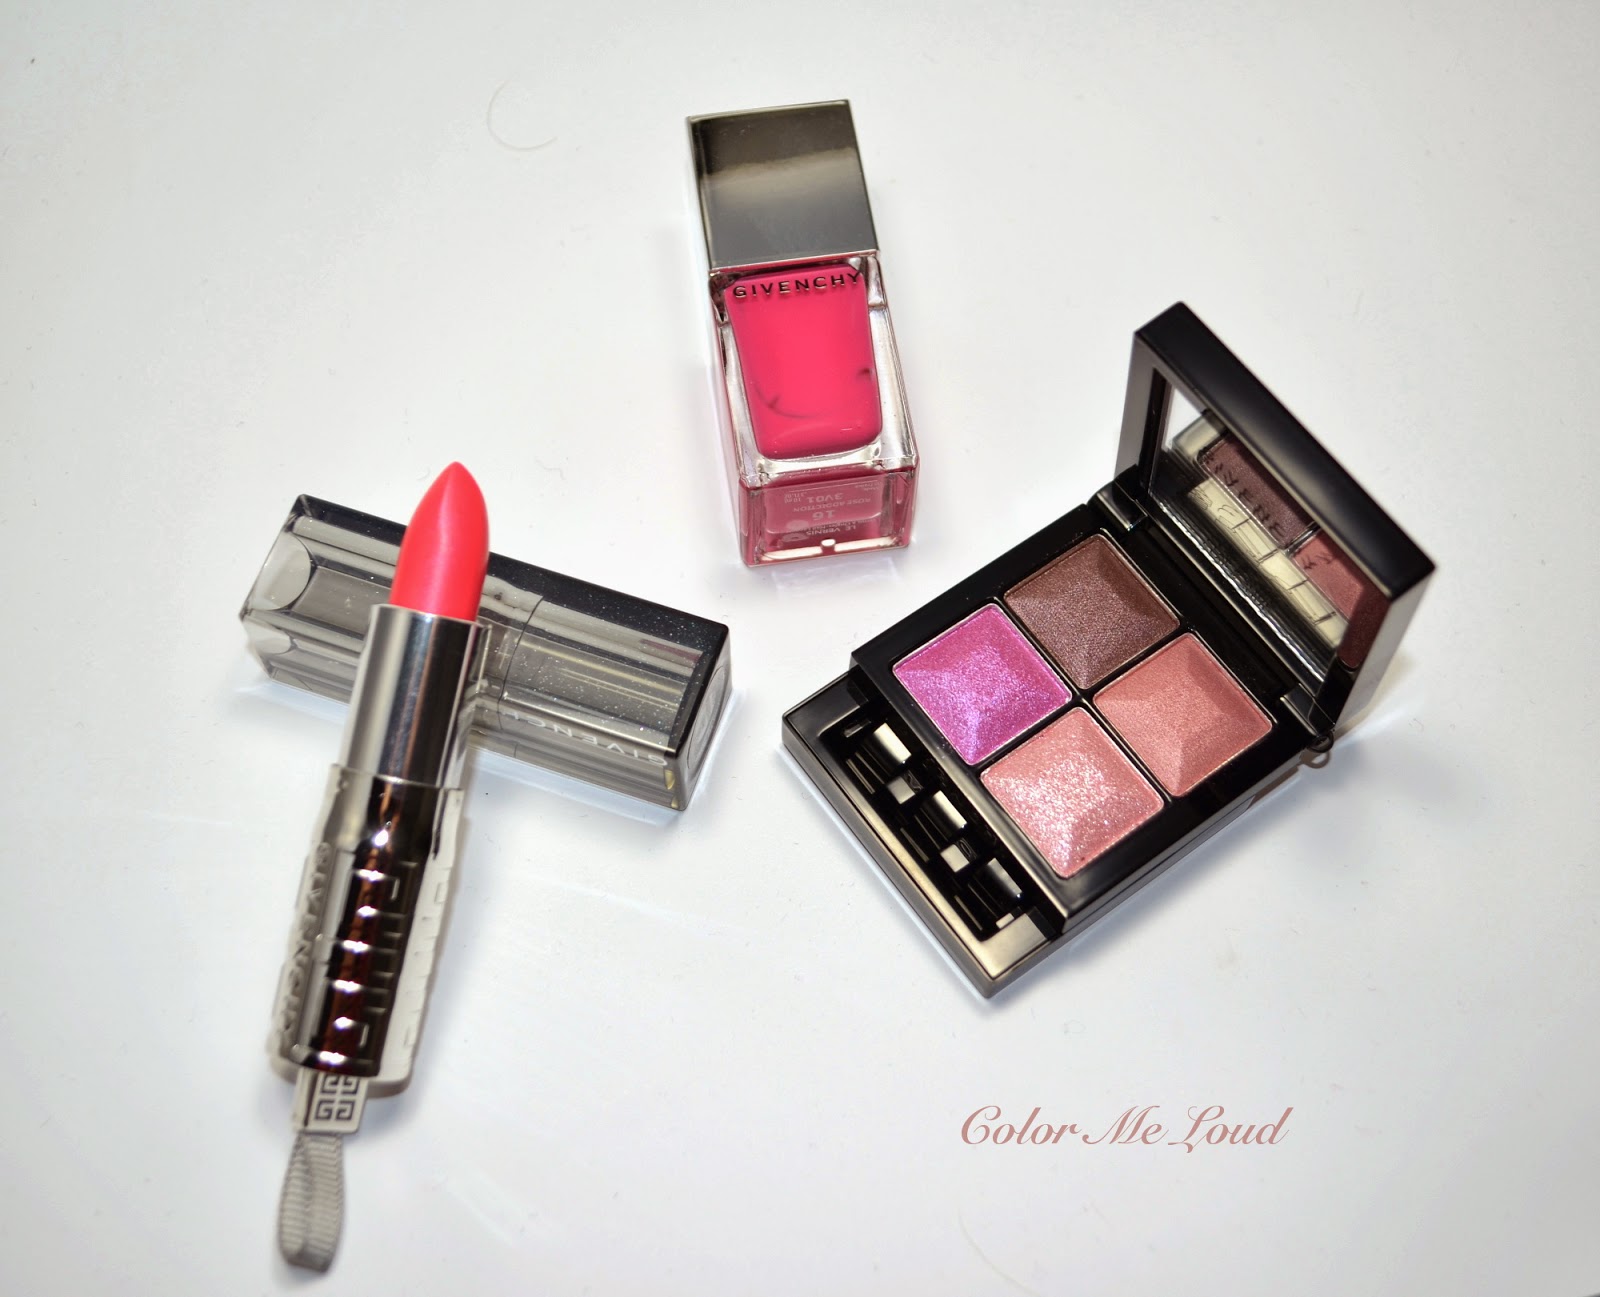 Givenchy Le Prisme #86 Rose Attraction, Le Vernis #16 Rose Addiction, Rouge Interdit Shine #36 Rose Sensation from Over Rose Spring 2014 Collection, Review, Swatches & FOTD